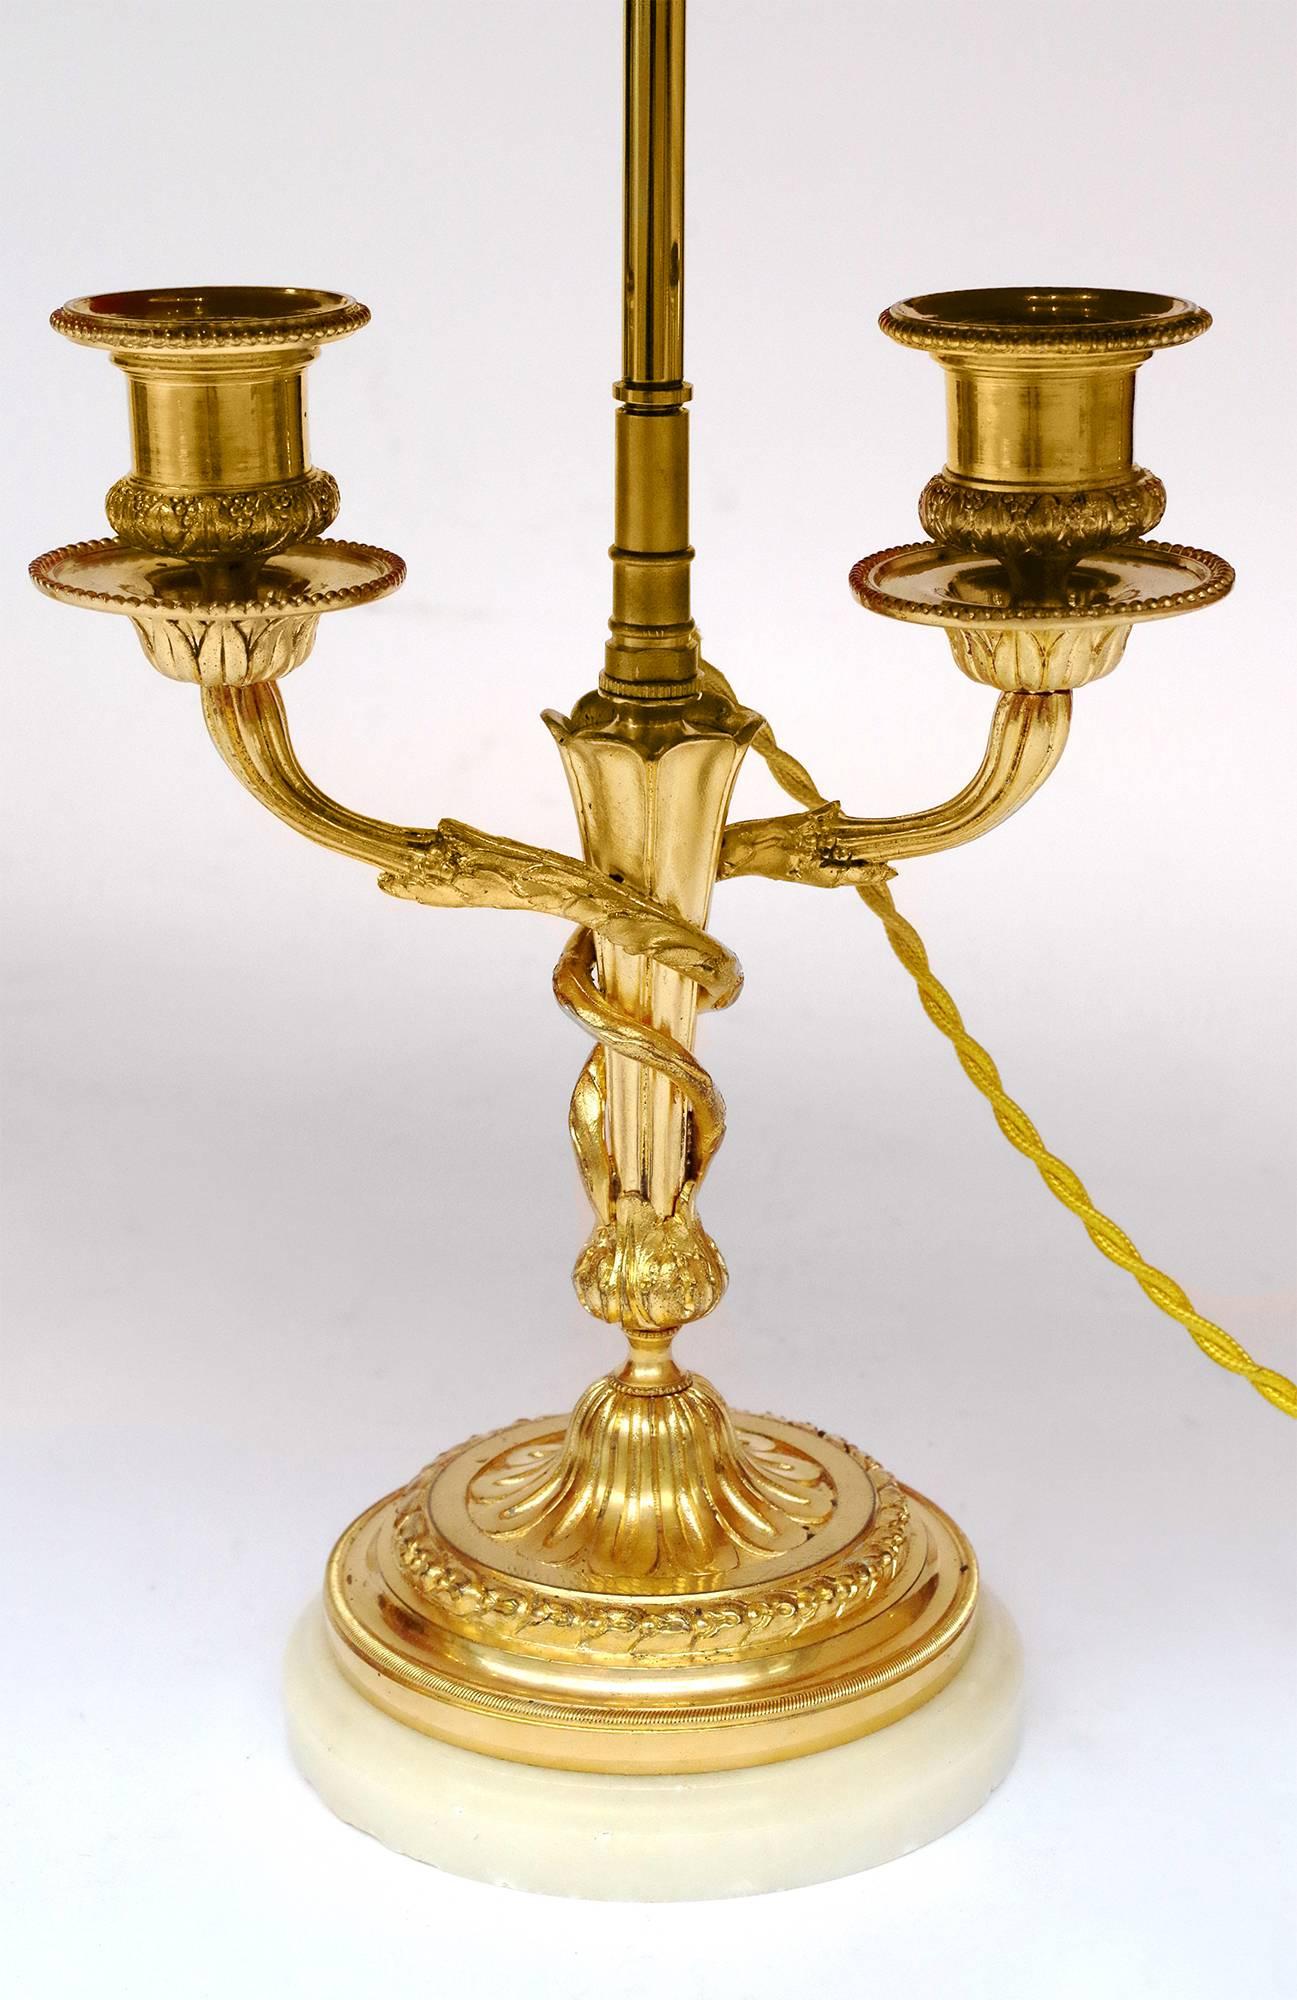 Pair of two Louis XVI style candlesticks in chiselled and gilt bronze mounted in lamps. Circular stand in Carrara white marble topped by a laurel wreath and a gadroon base. Around the torch shape shaft two plant branches are interlaced and end in